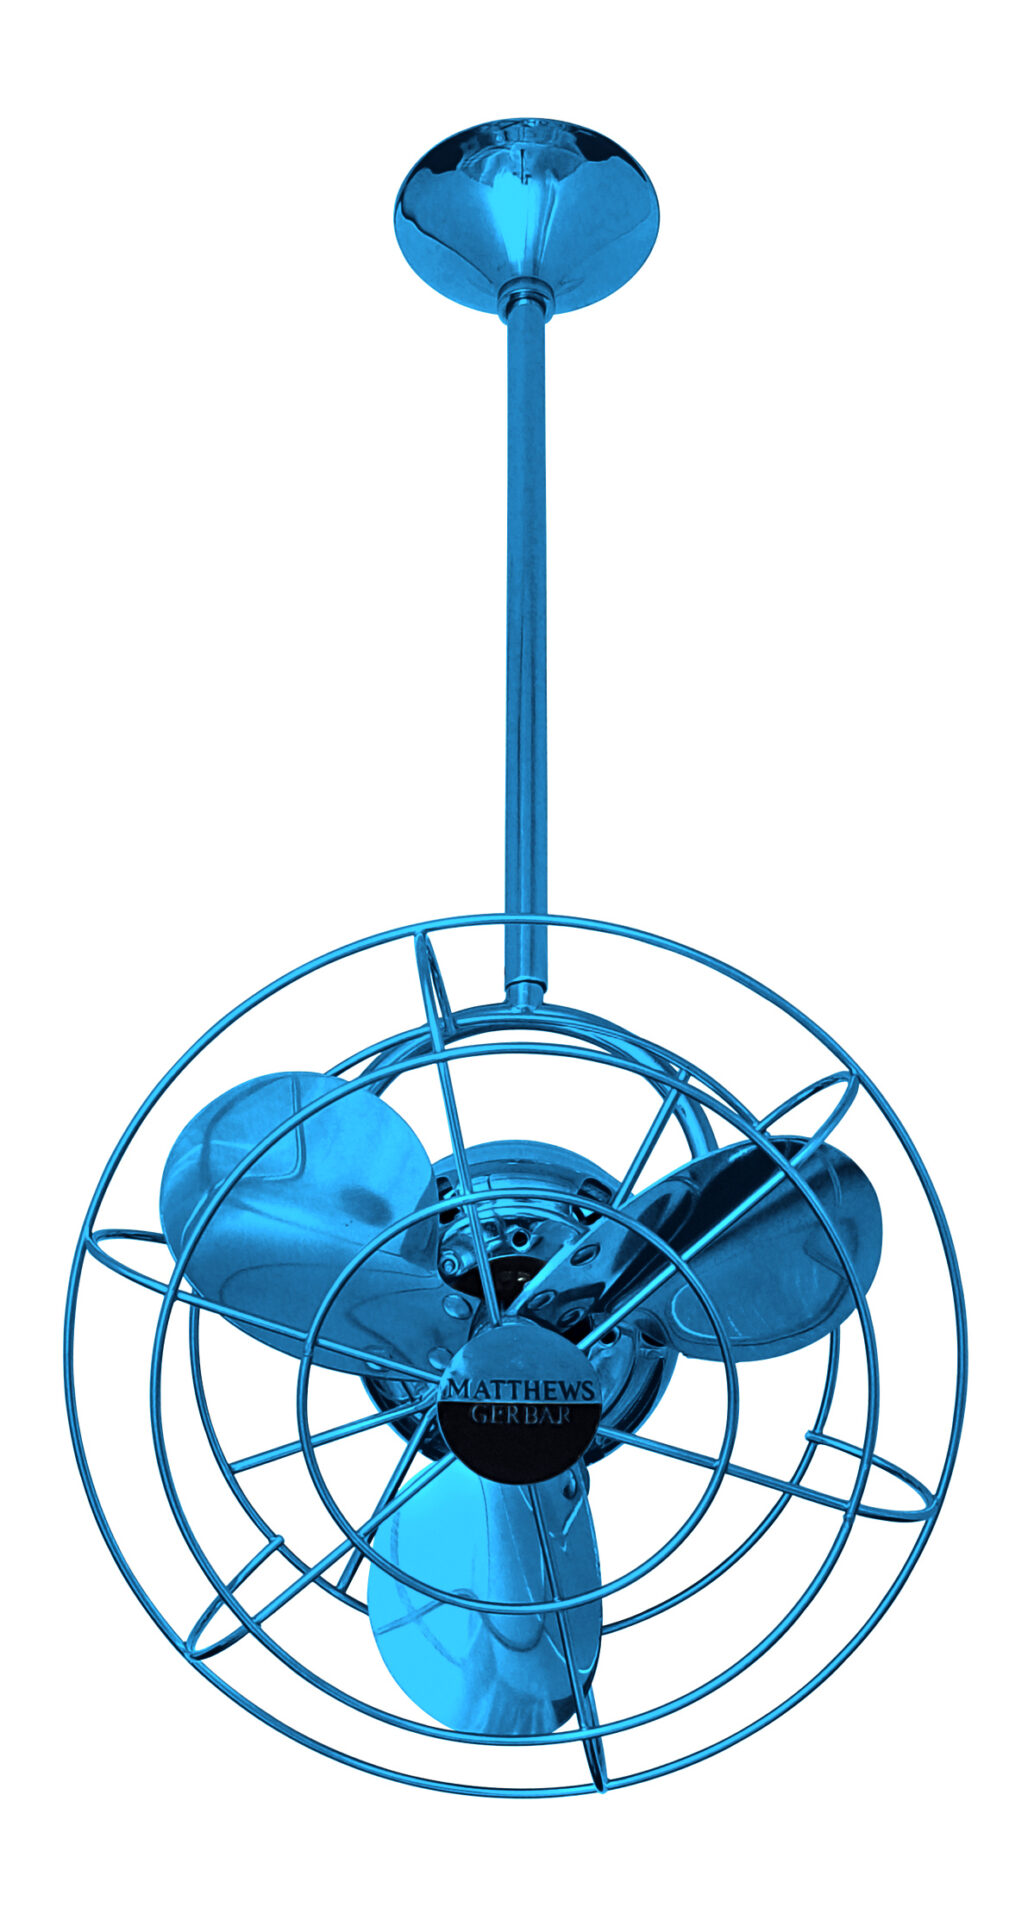 Bianca Direcional ceiling fan in Light Blue / Agua Marinha with metal blades and decorative cage by Matthews Fan Company.